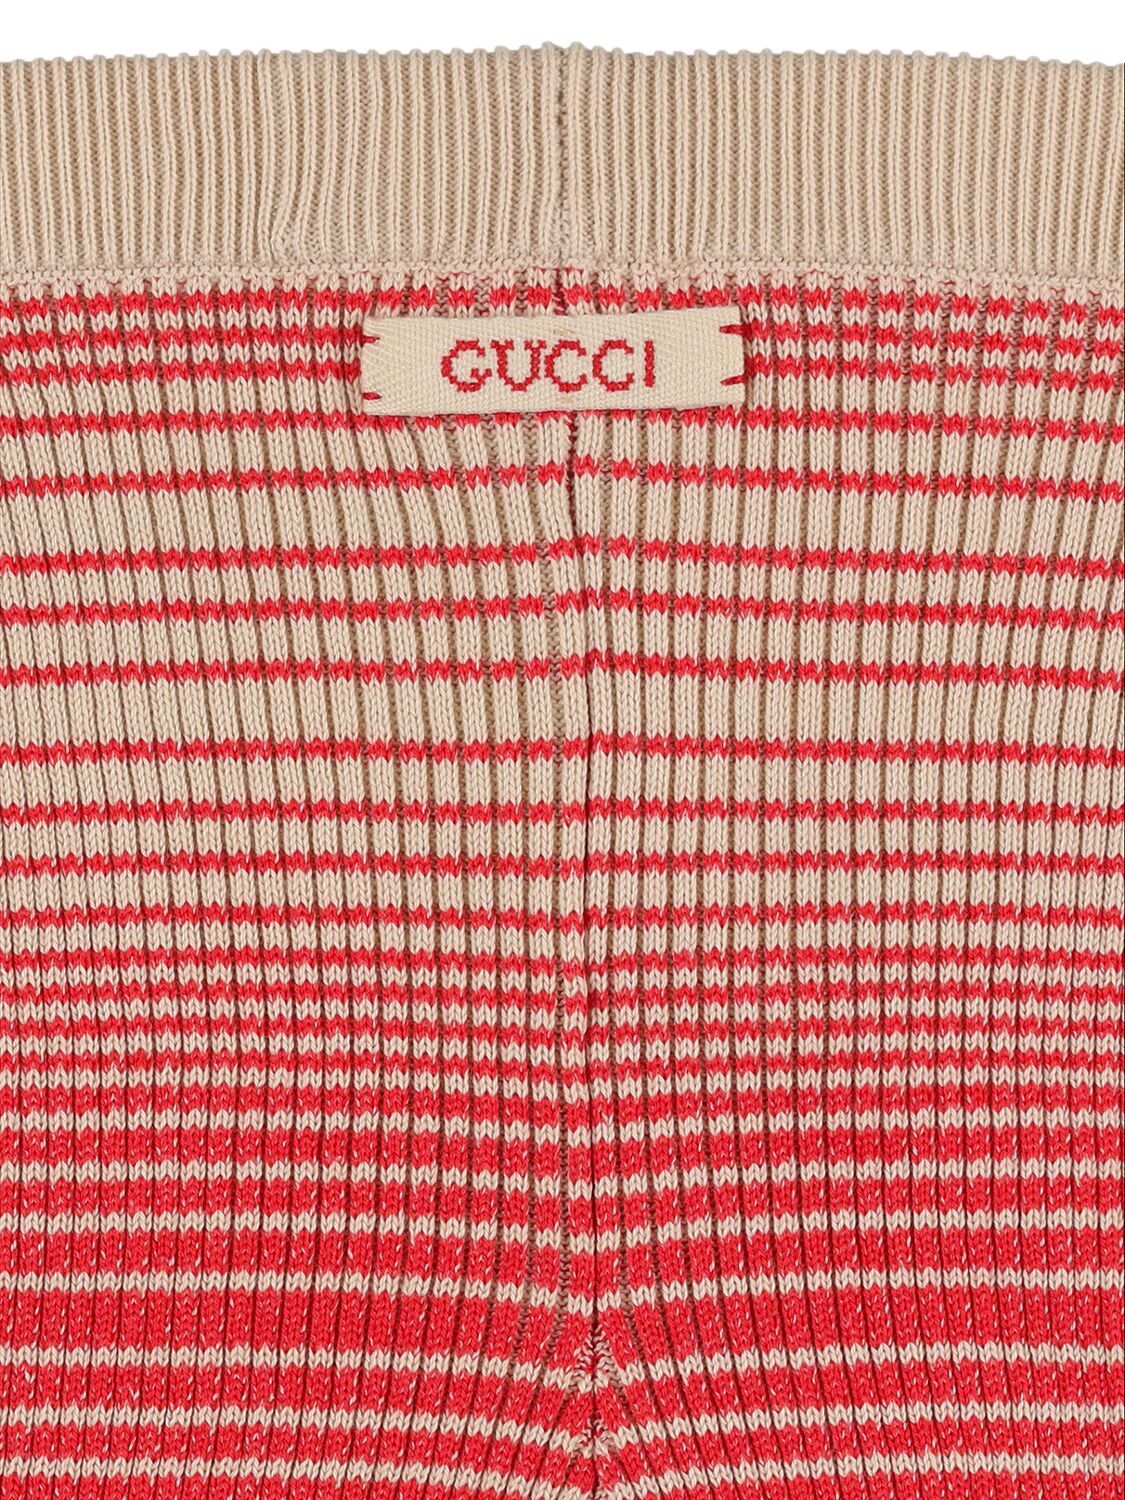 Shop Gucci Cotton Shorts In Red,beige